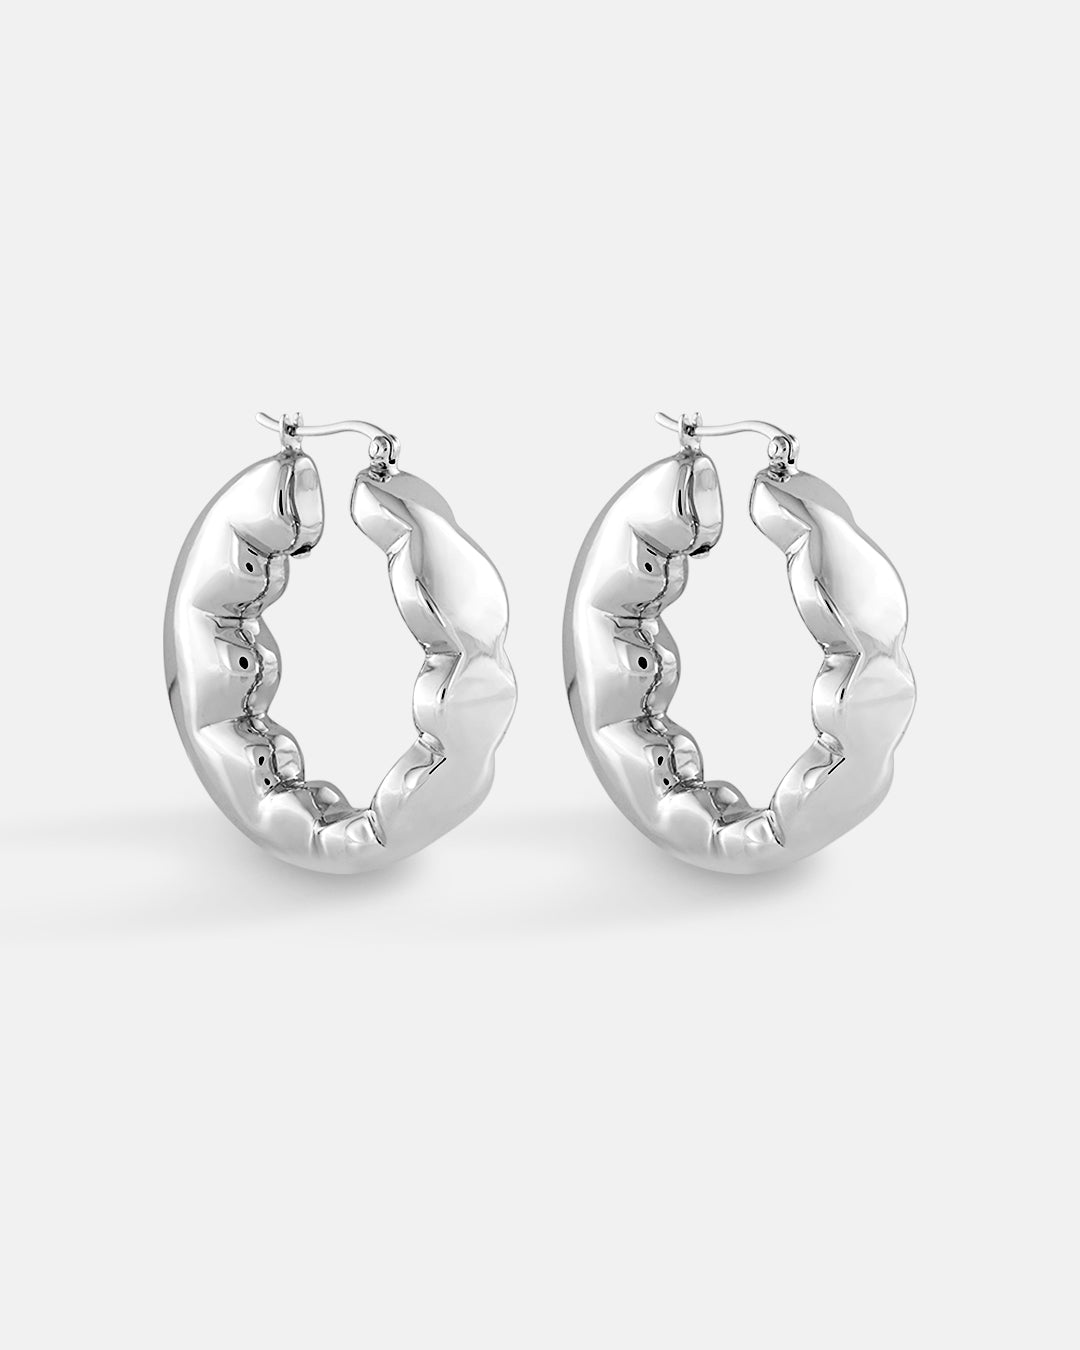 This is the product picture of freeform organic round shape hoop earrings plated in white gold in sterling silver material